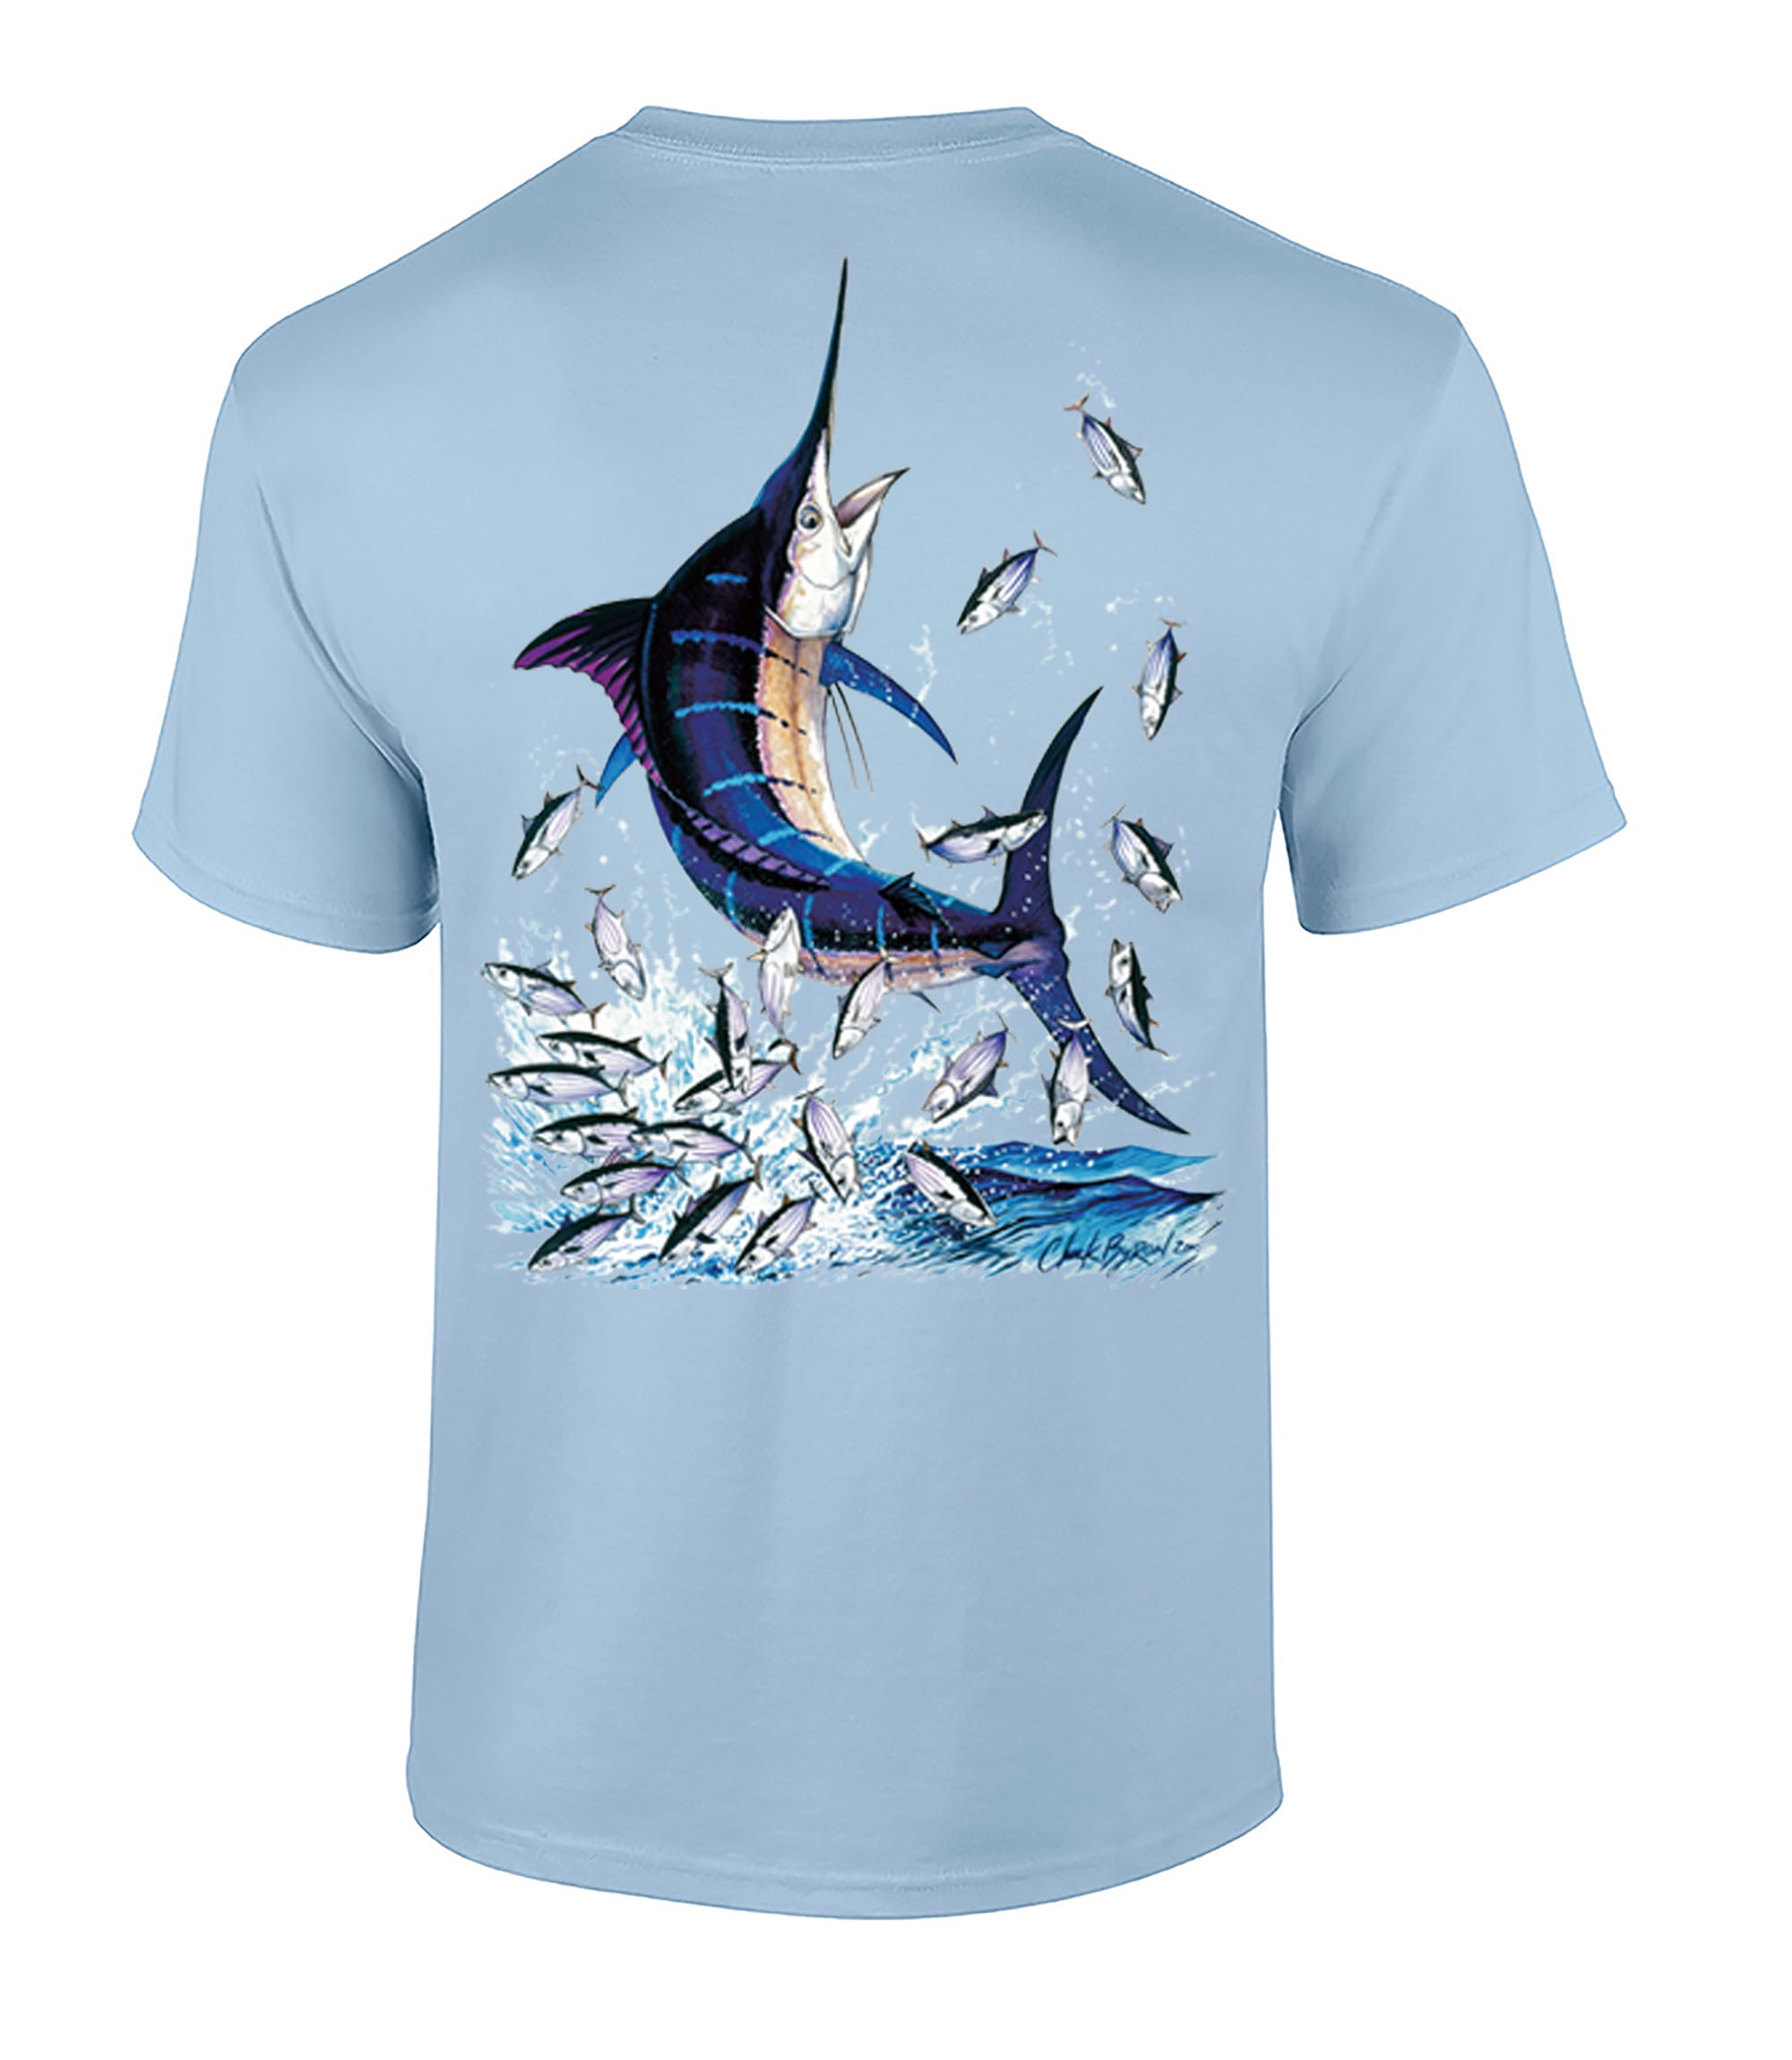 Saw-Toothed Sailfish Funny Fisherman Outdoors Fishing Gift Classic T Shirt Tee 